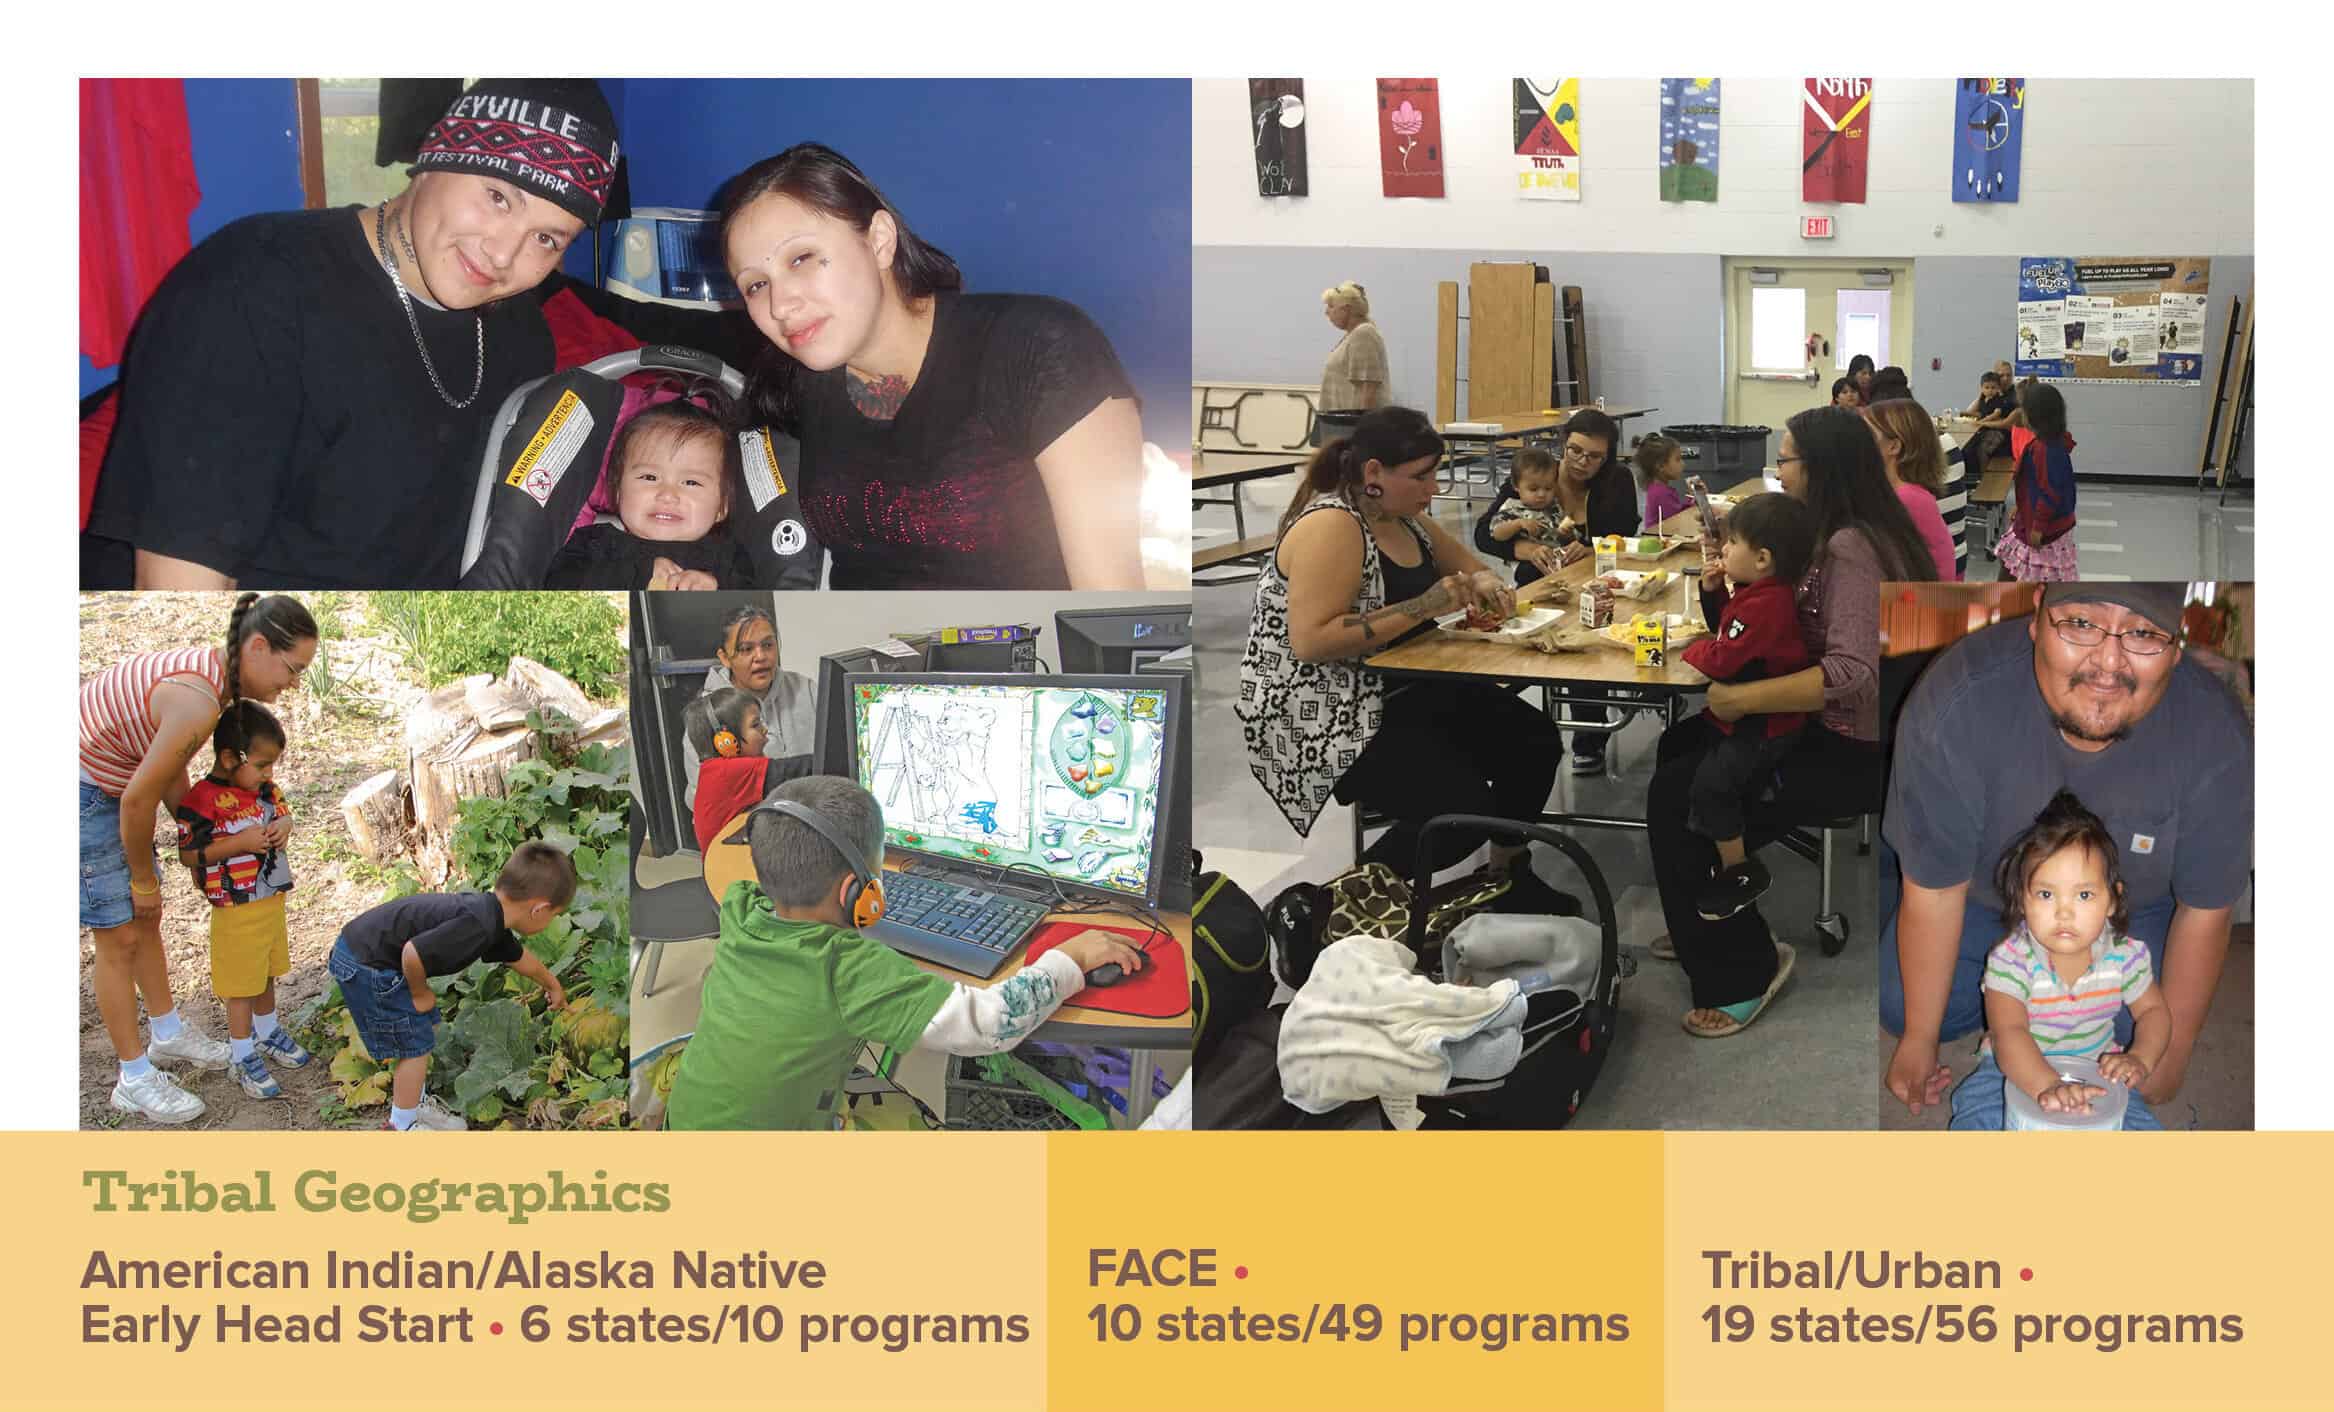 Tribal Geographics: American Indian/Alaska Native Early Head Start • 6 states/10 programs; FACE • 10 states/49 programs; Tribal/Urban • 19 states/56 programs